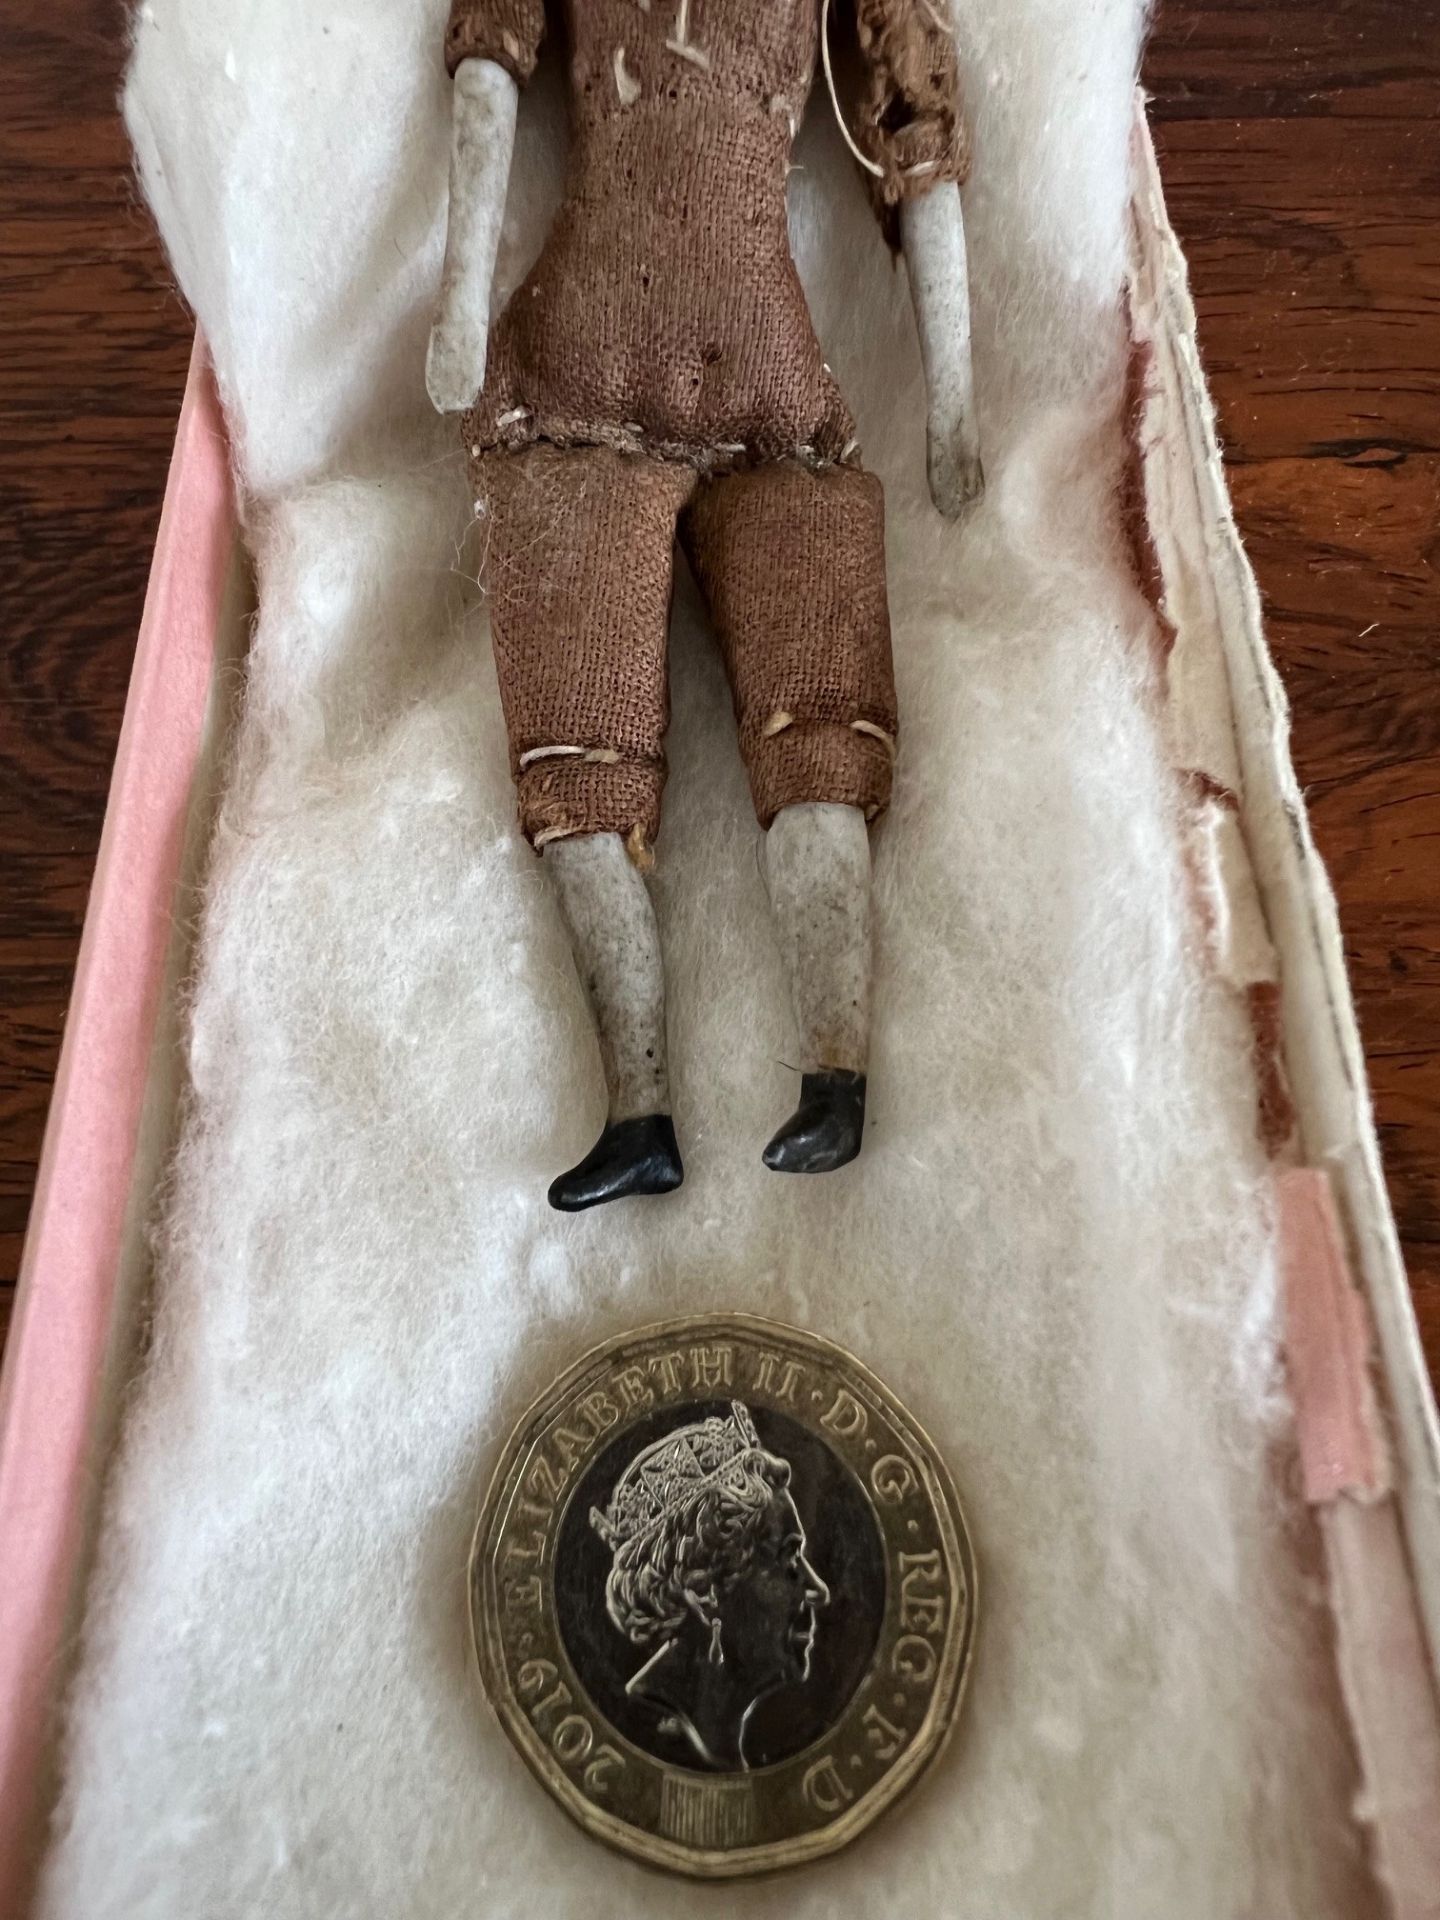 MINIATURE DOLL WITH PORCELAIN HEAD, ARMS AND LEGS, CLOTH BODY - Image 4 of 5